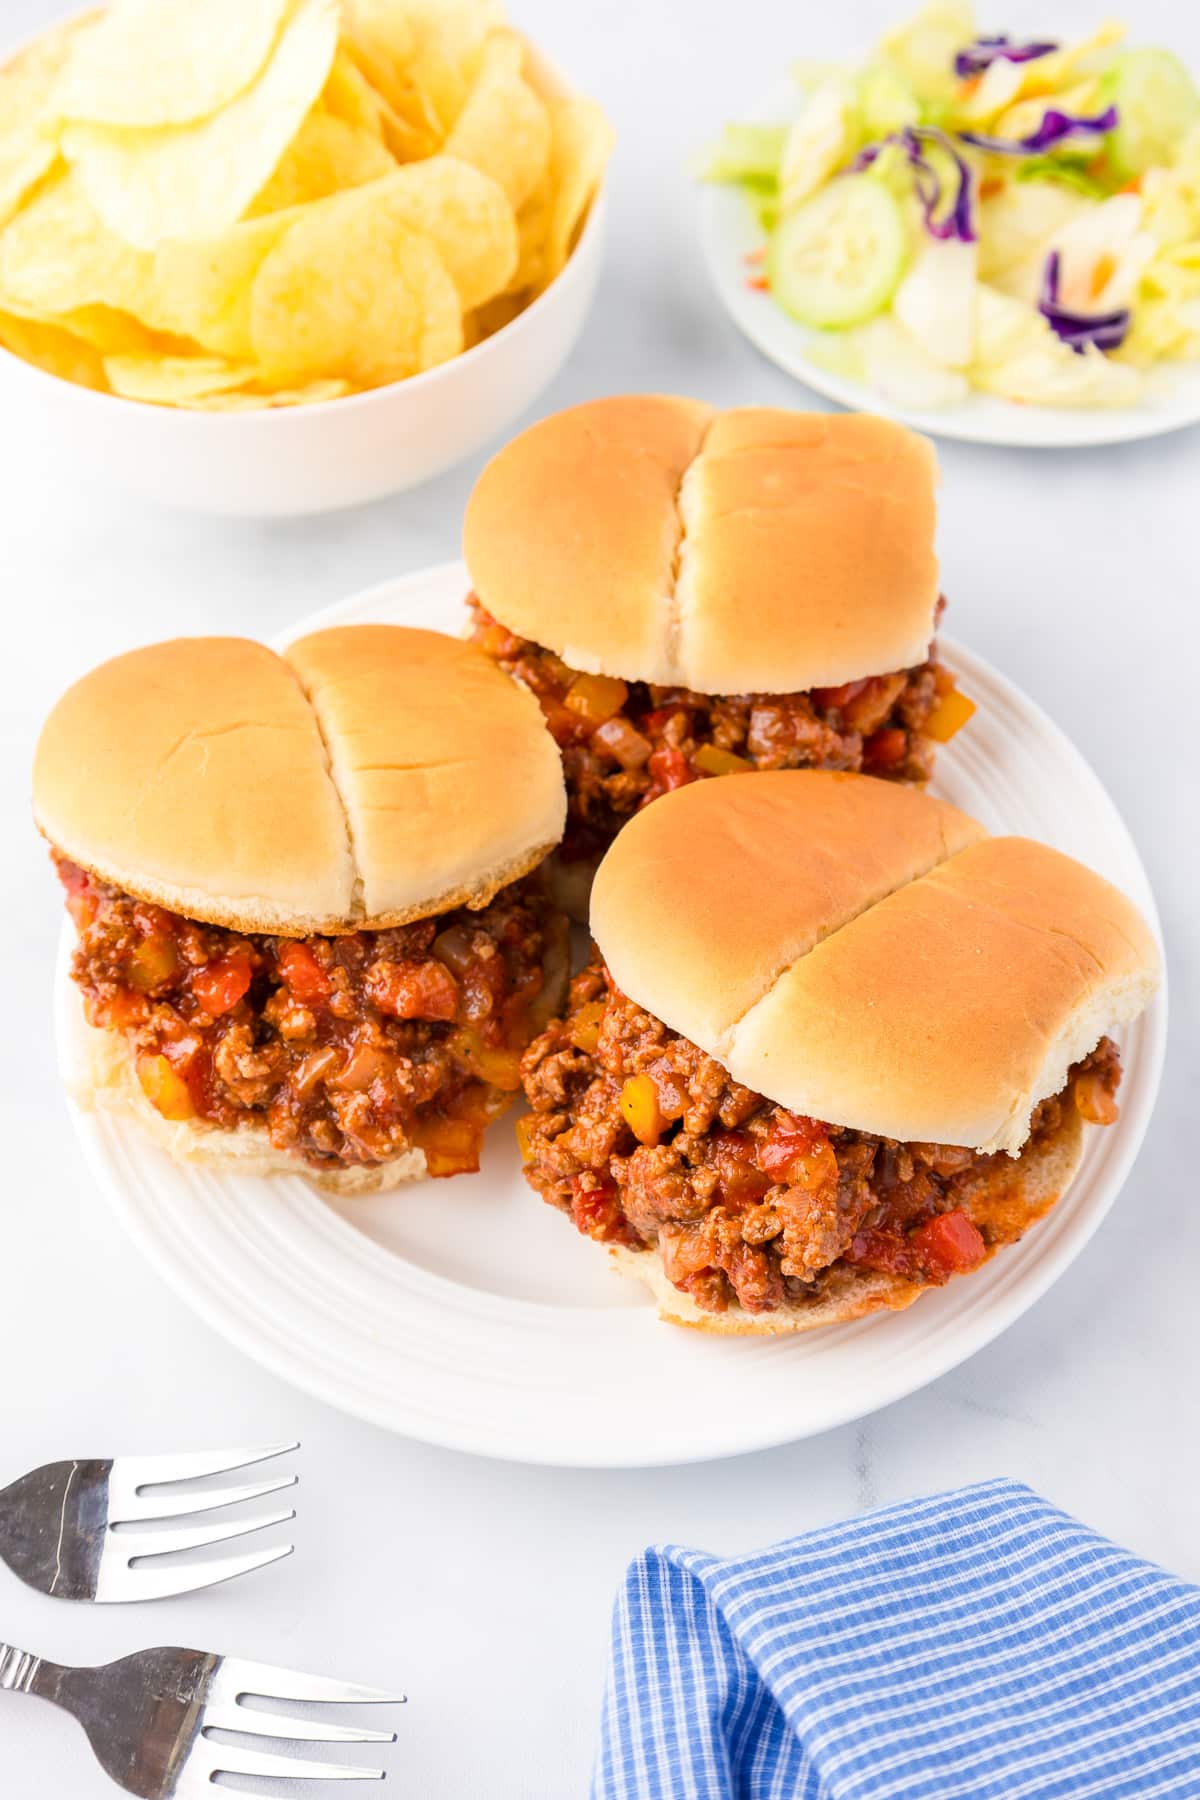 Three sloppy joes on a serving platter with chips and salad in bowls in the background.